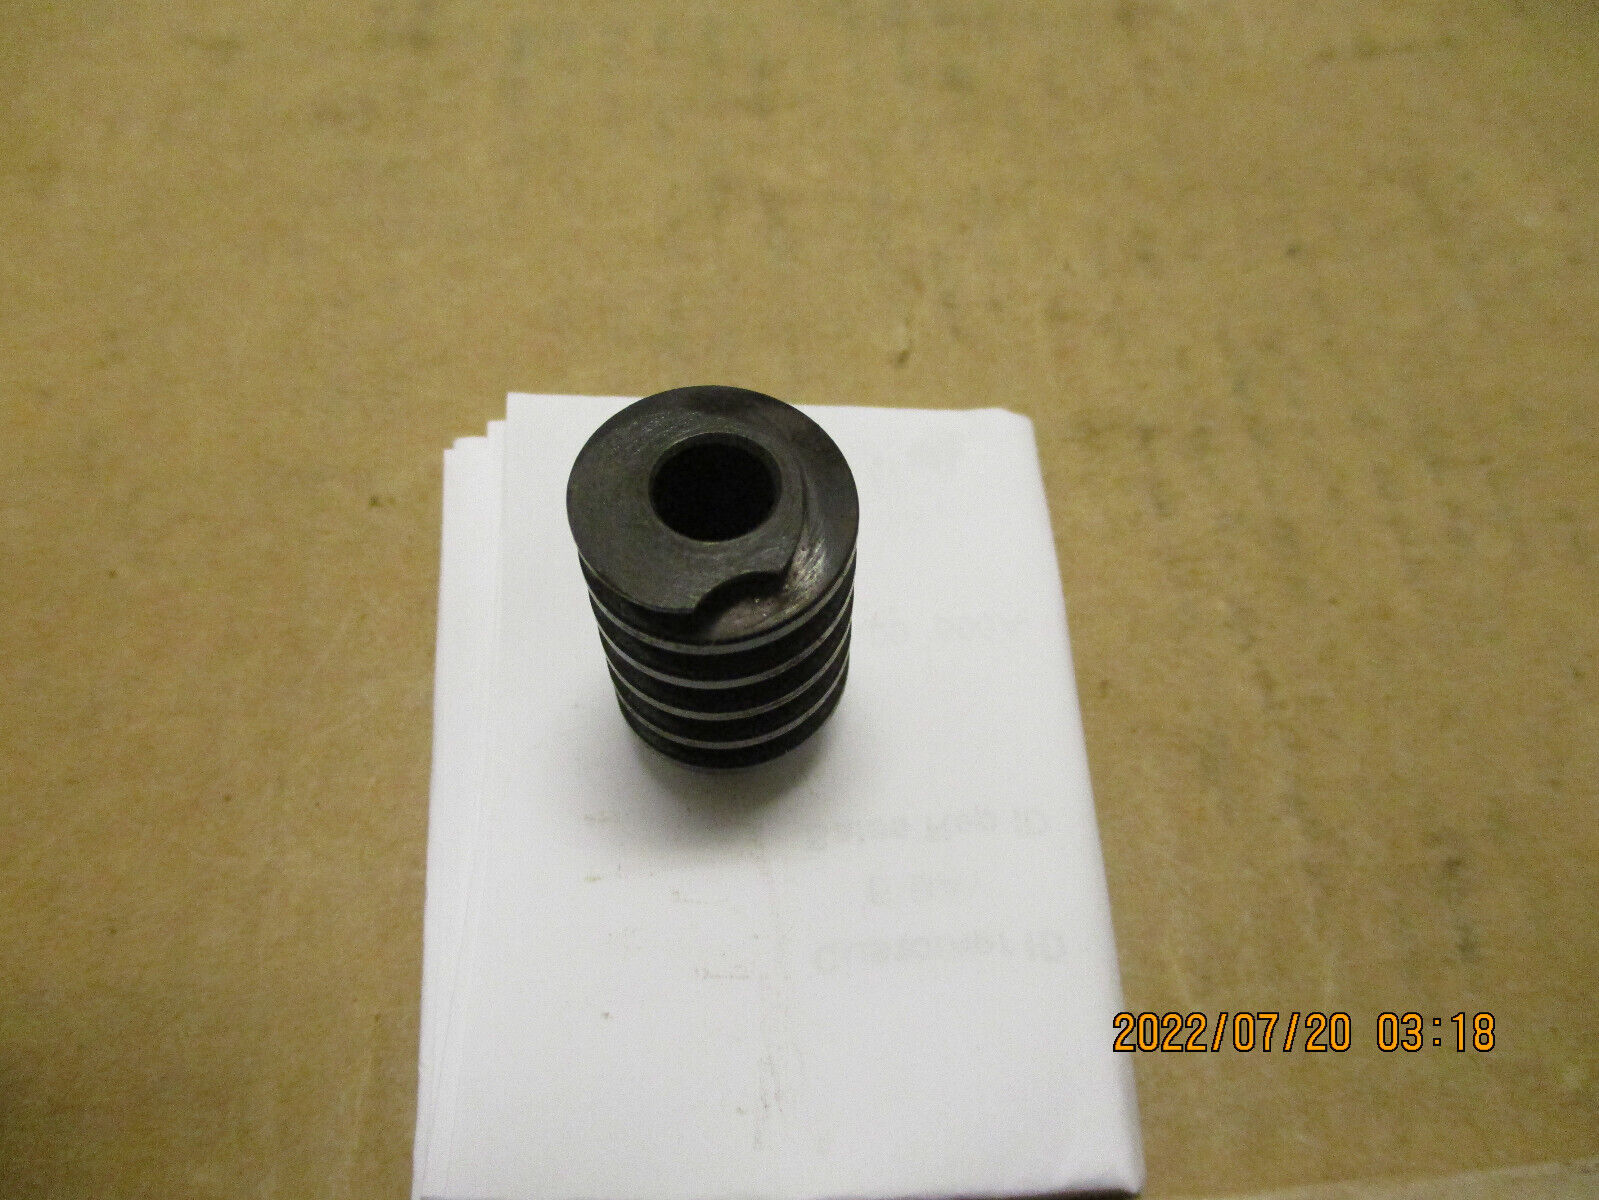 New Other Boston Lvhb-1 Worm Gear, 16 Pitch, Single Lead, 1/4"bore, R.h.